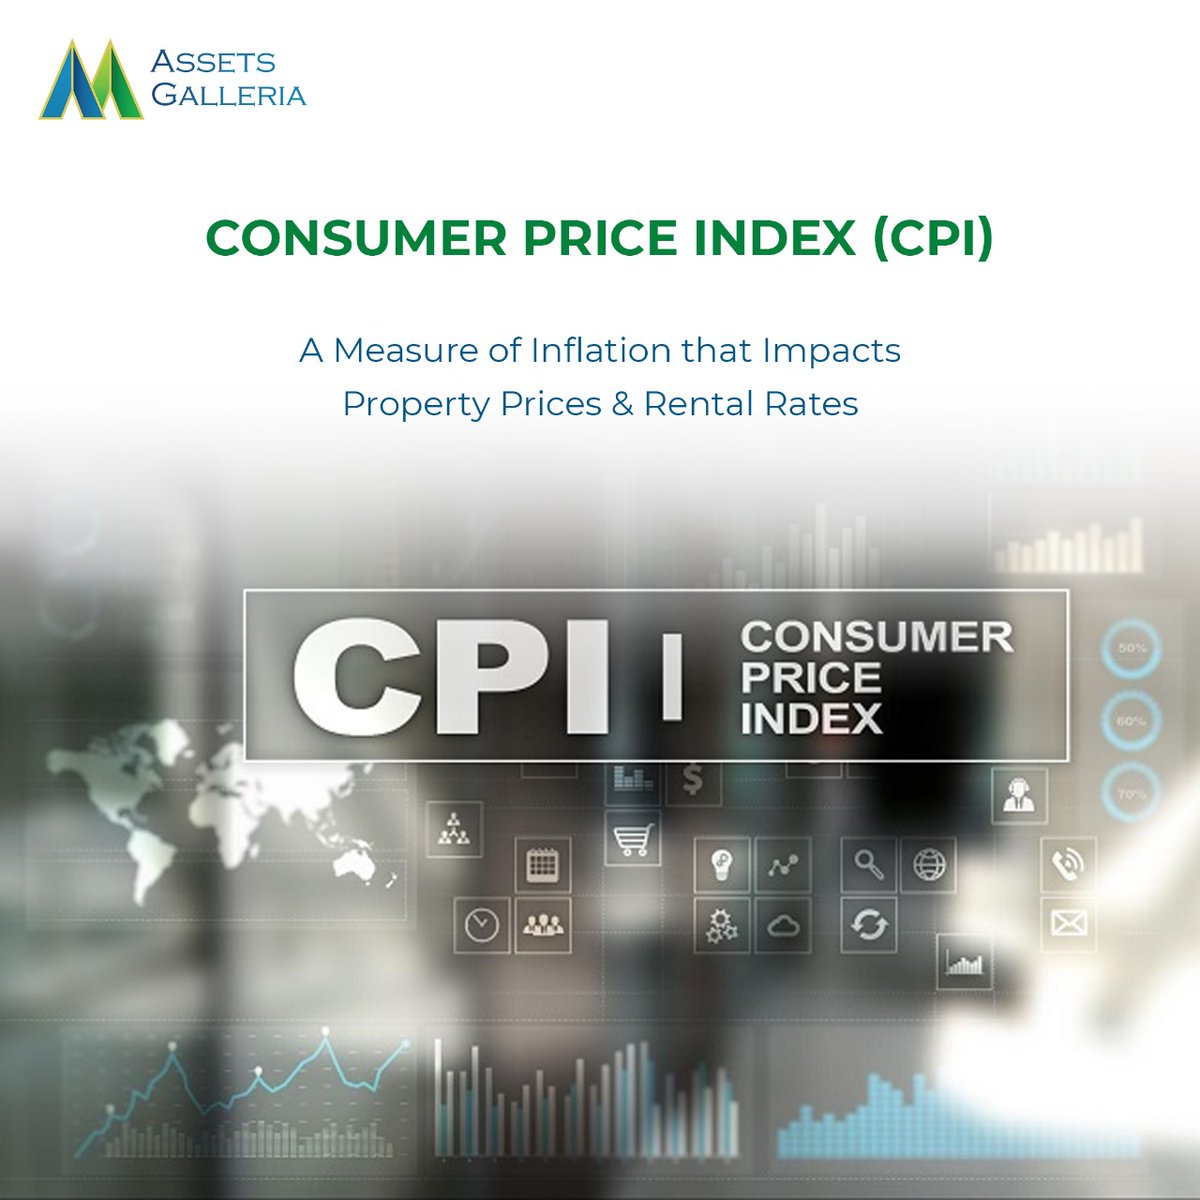 #ConsumerPriceIndex (CPI)

A Measure of Inflation that Impacts #PropertyPrices & #RentalRates

#AssetsGalleria #gurgaonrealestate #gurgaonrealestateagent #realestateexpert #realestateinvestor #realestategurgaon #gurgaonlife #realestateforsale #delhirealtor #realestatetips